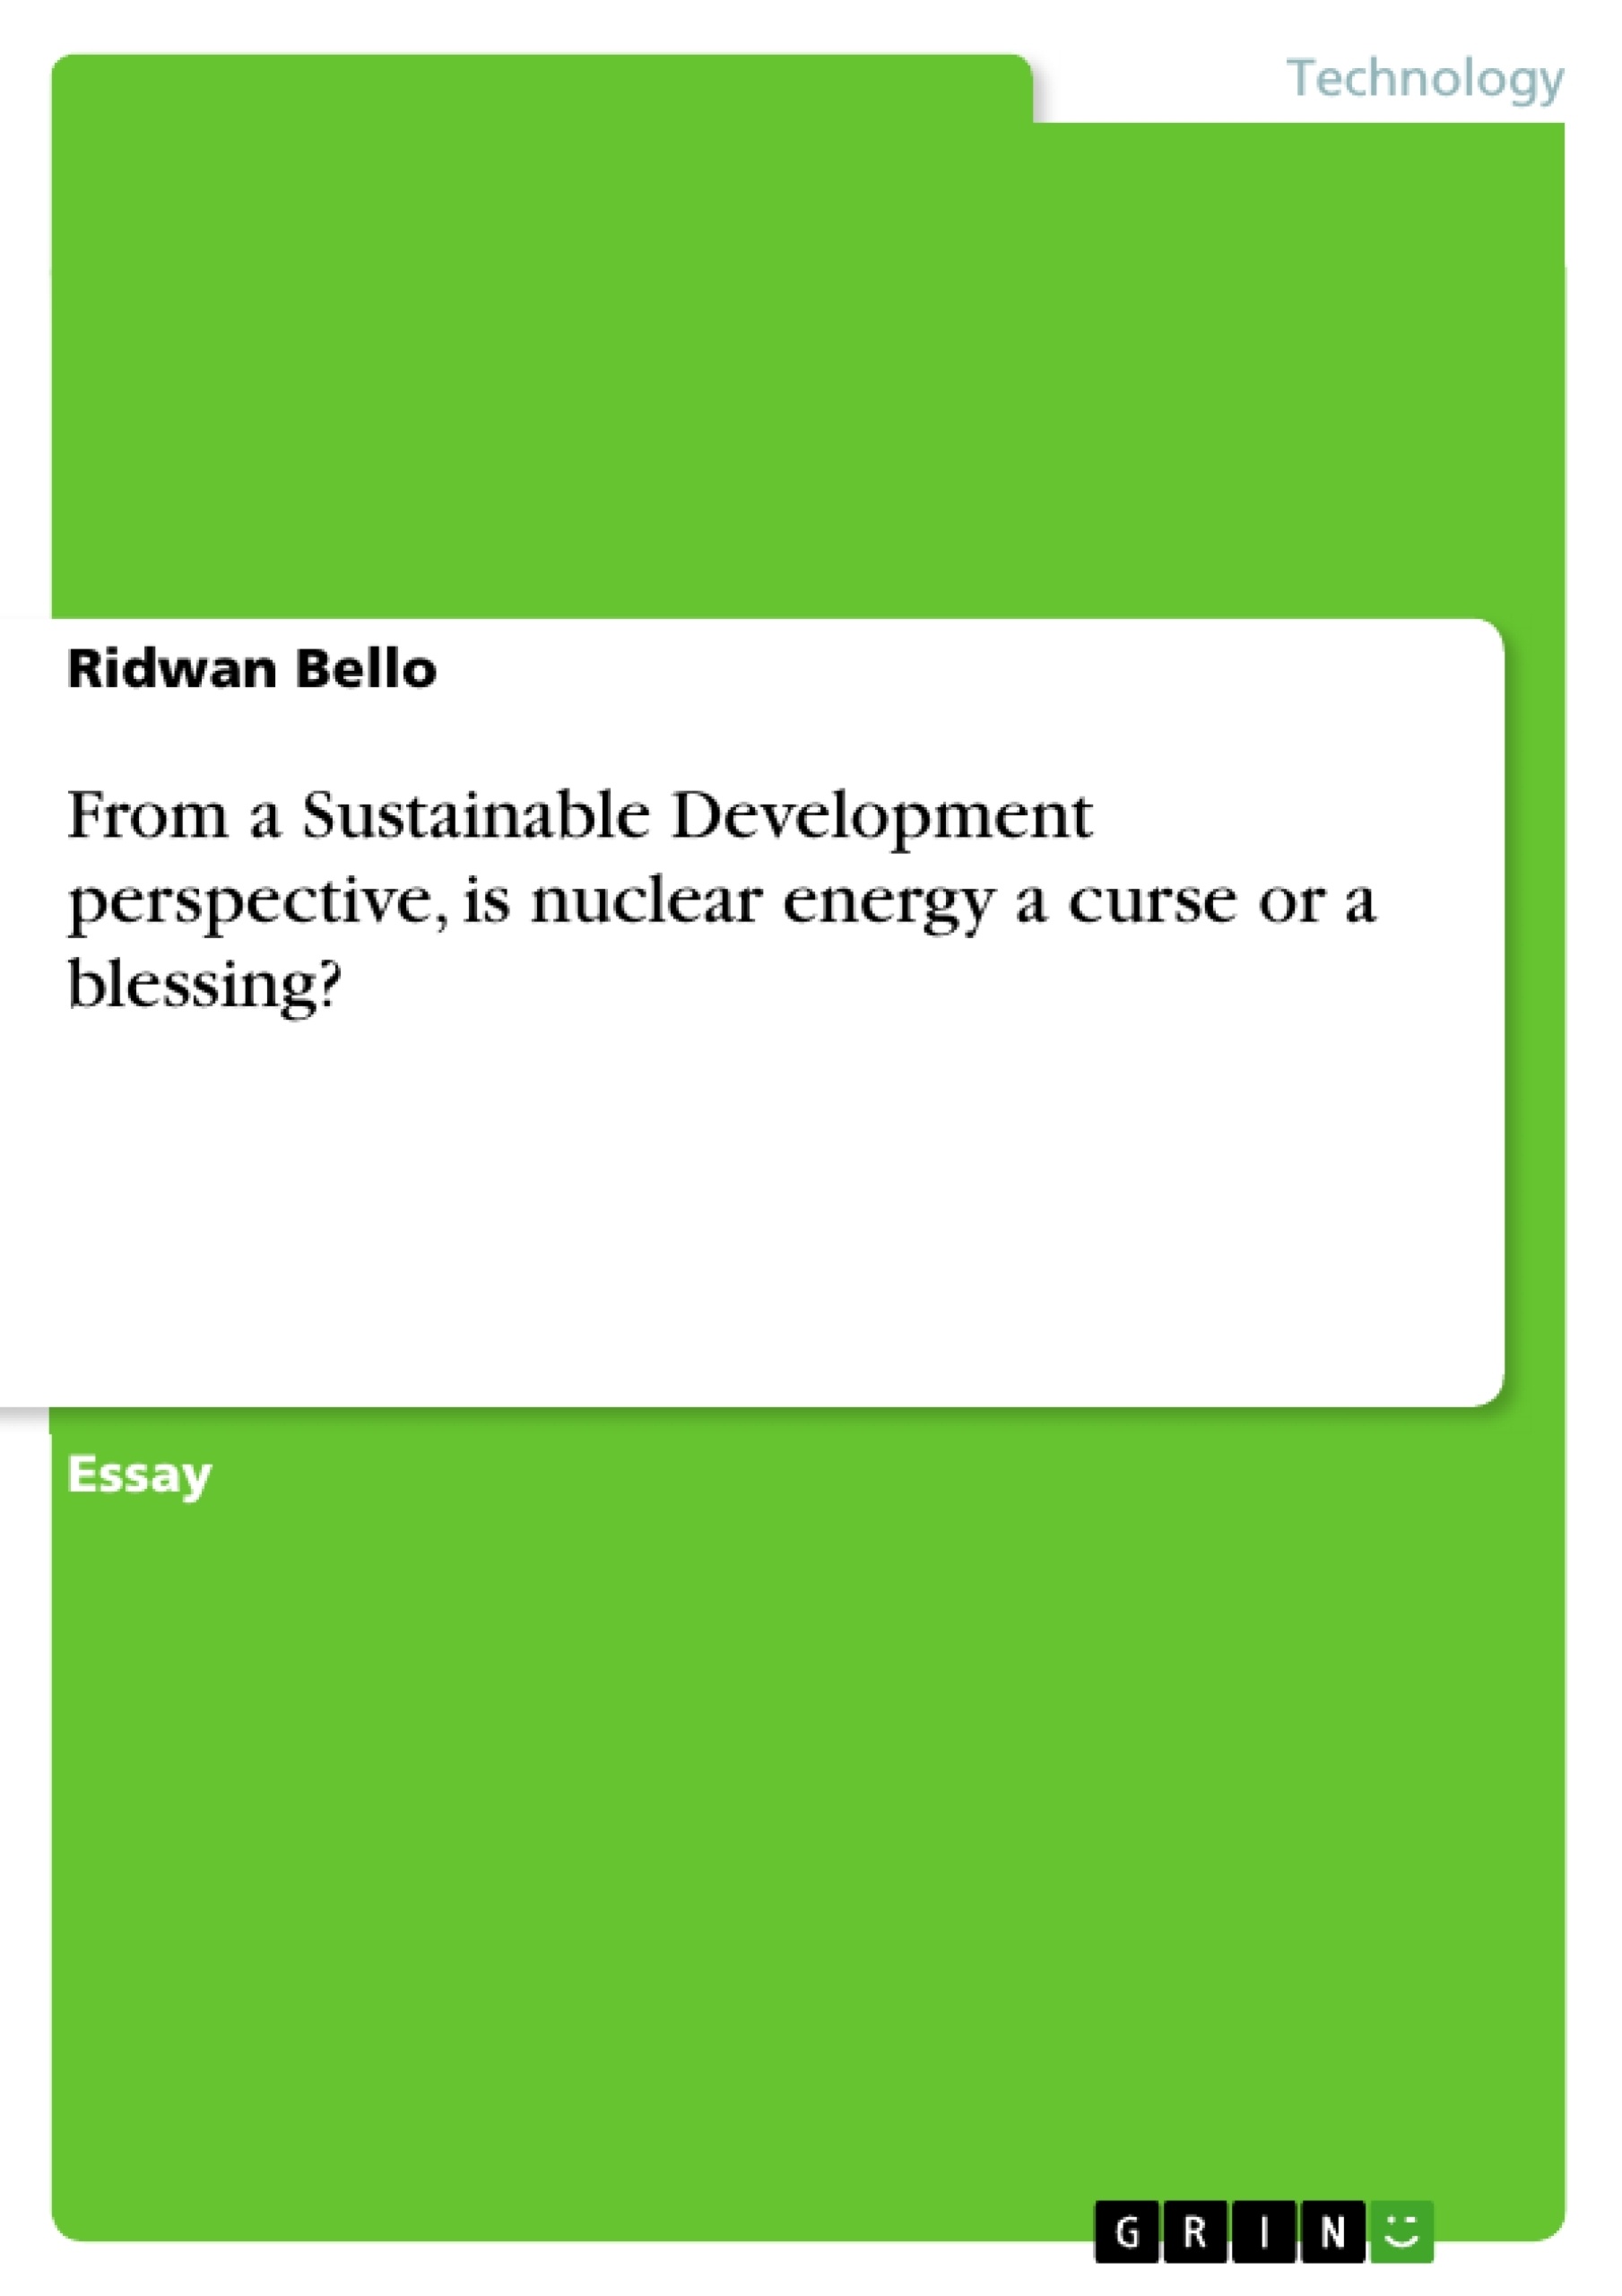 Title: From a Sustainable Development perspective, is nuclear energy a curse or a blessing?